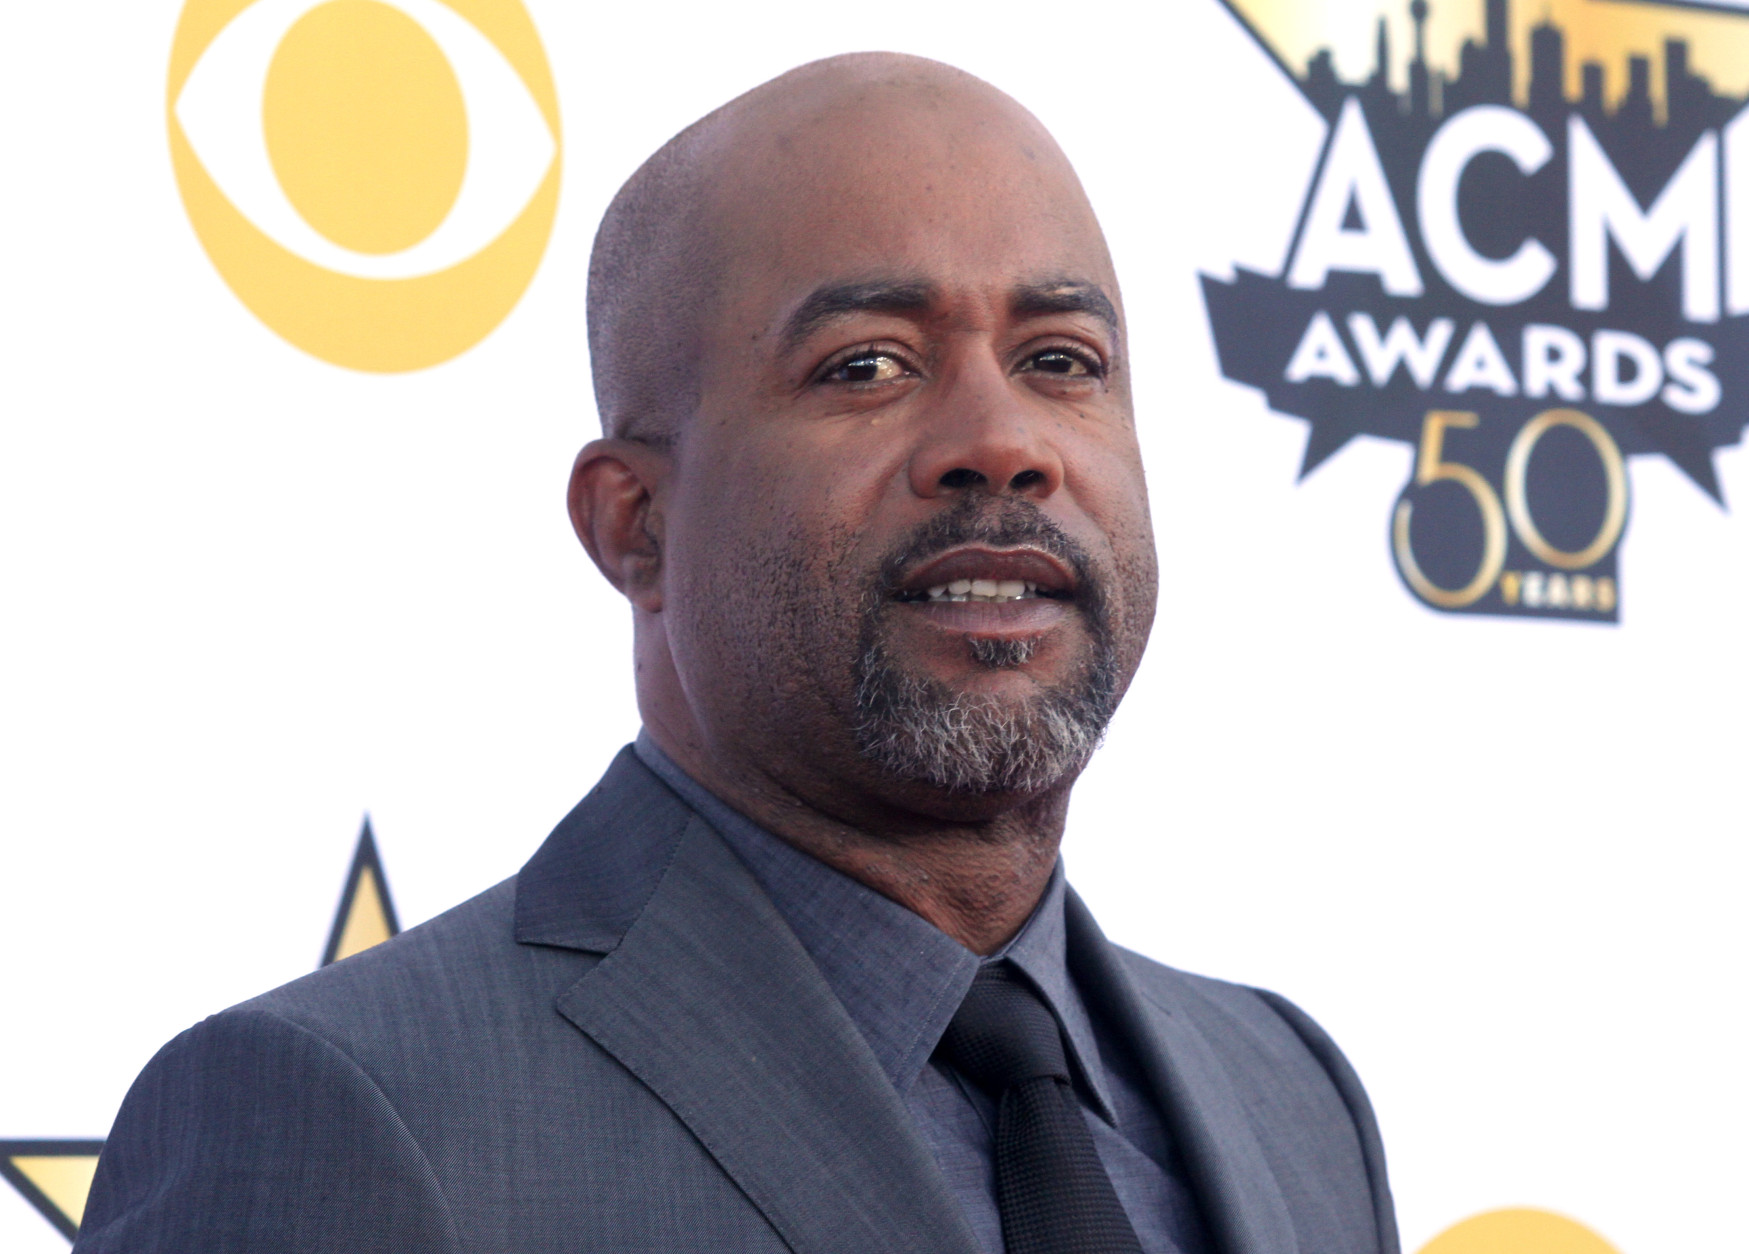 Darius Rucker arrives at the 50th annual Academy of Country Music Awards at AT&amp;T Stadium on Sunday, April 19, 2015, in Arlington, Texas. (Photo by Jack Plunkett/Invision/AP)